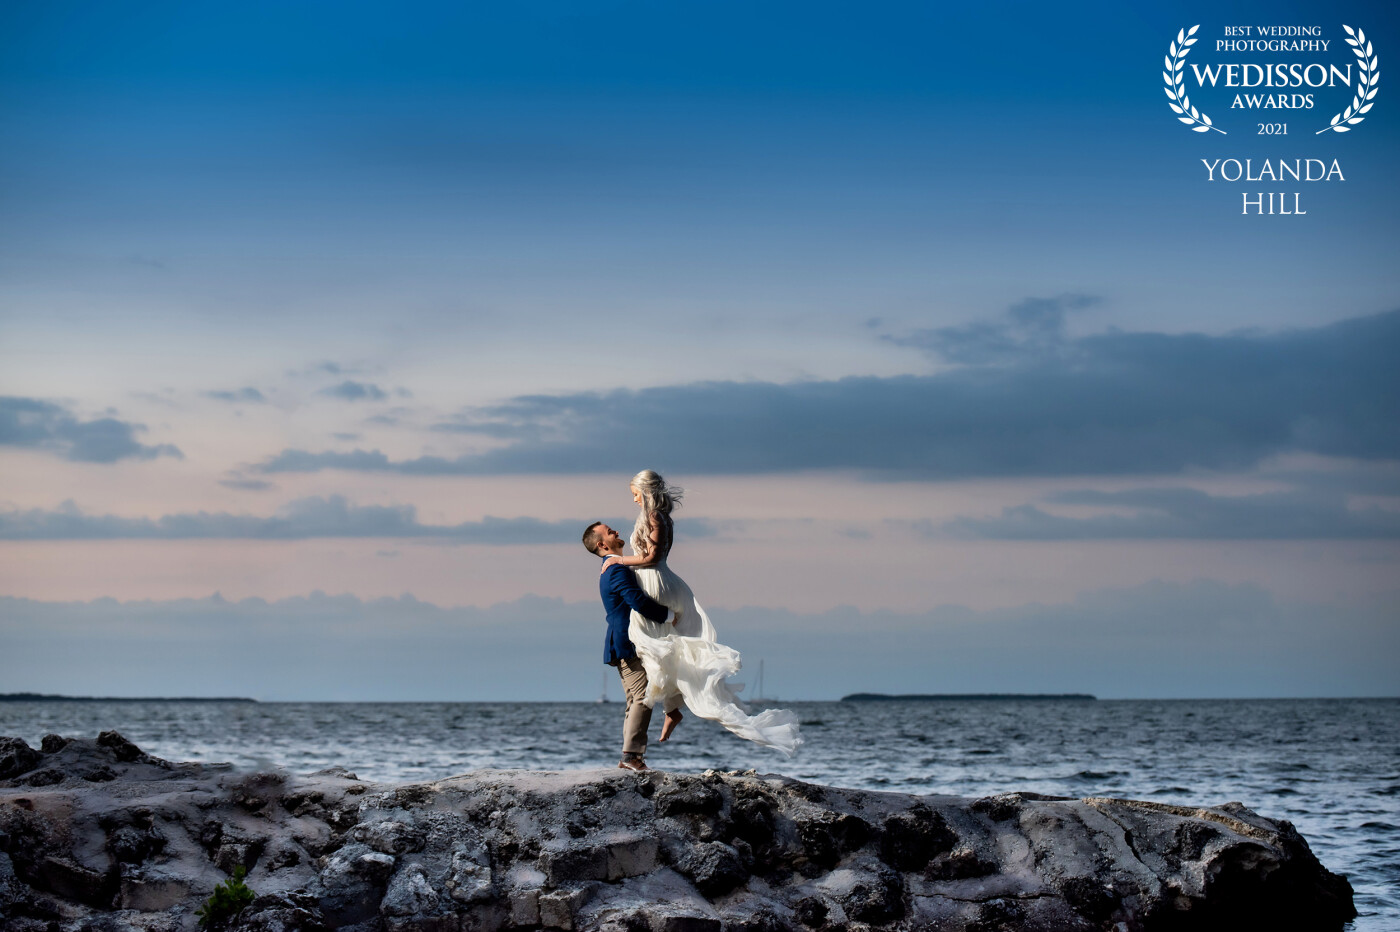 Morgan and Nick had a small intimate wedding in the beautiful Florida Keys. Their first dance had this lift and I thought, let's create an image to remember that moment forever. 